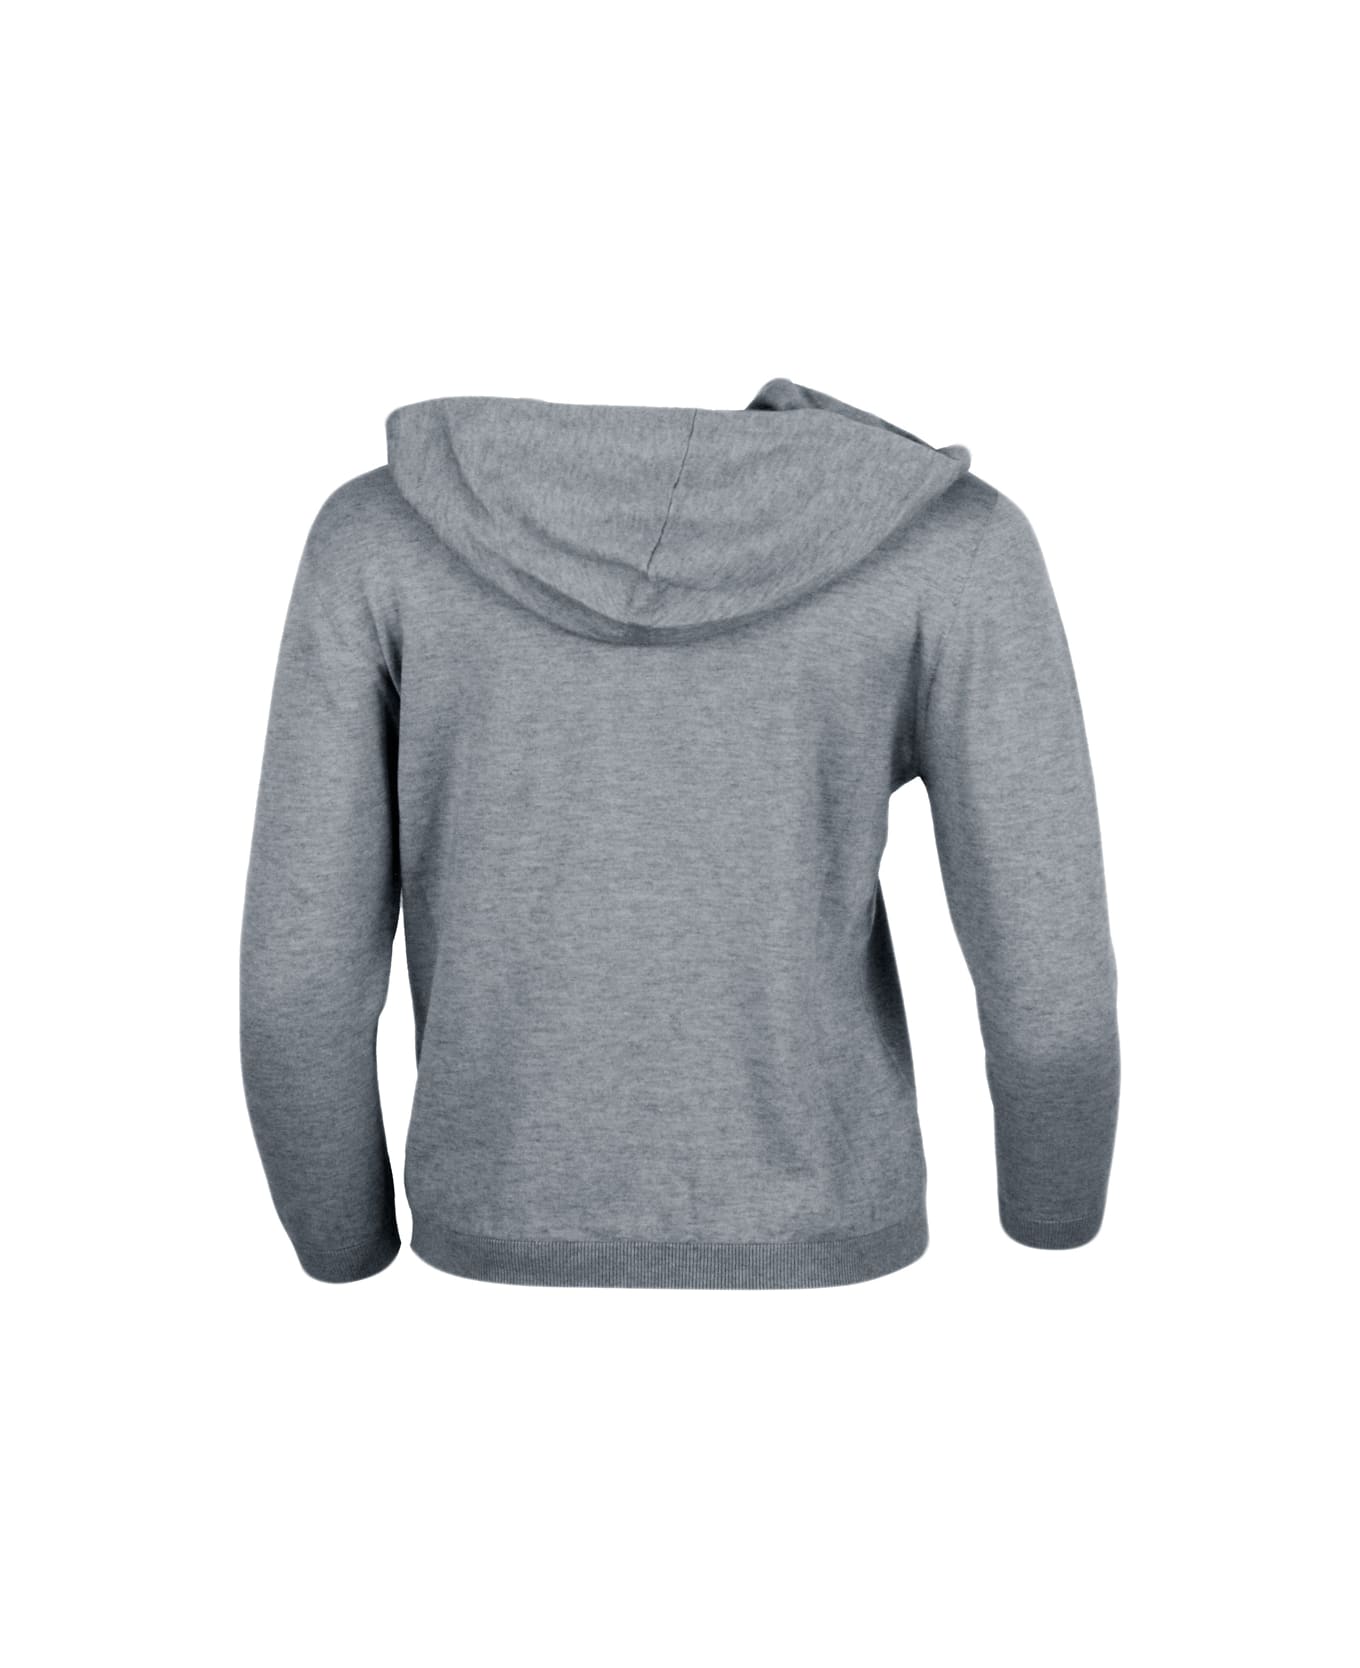 Lorena Antoniazzi Half-zip Sweater With Long-sleeved Hood In Cotton And Cashmere - Grey